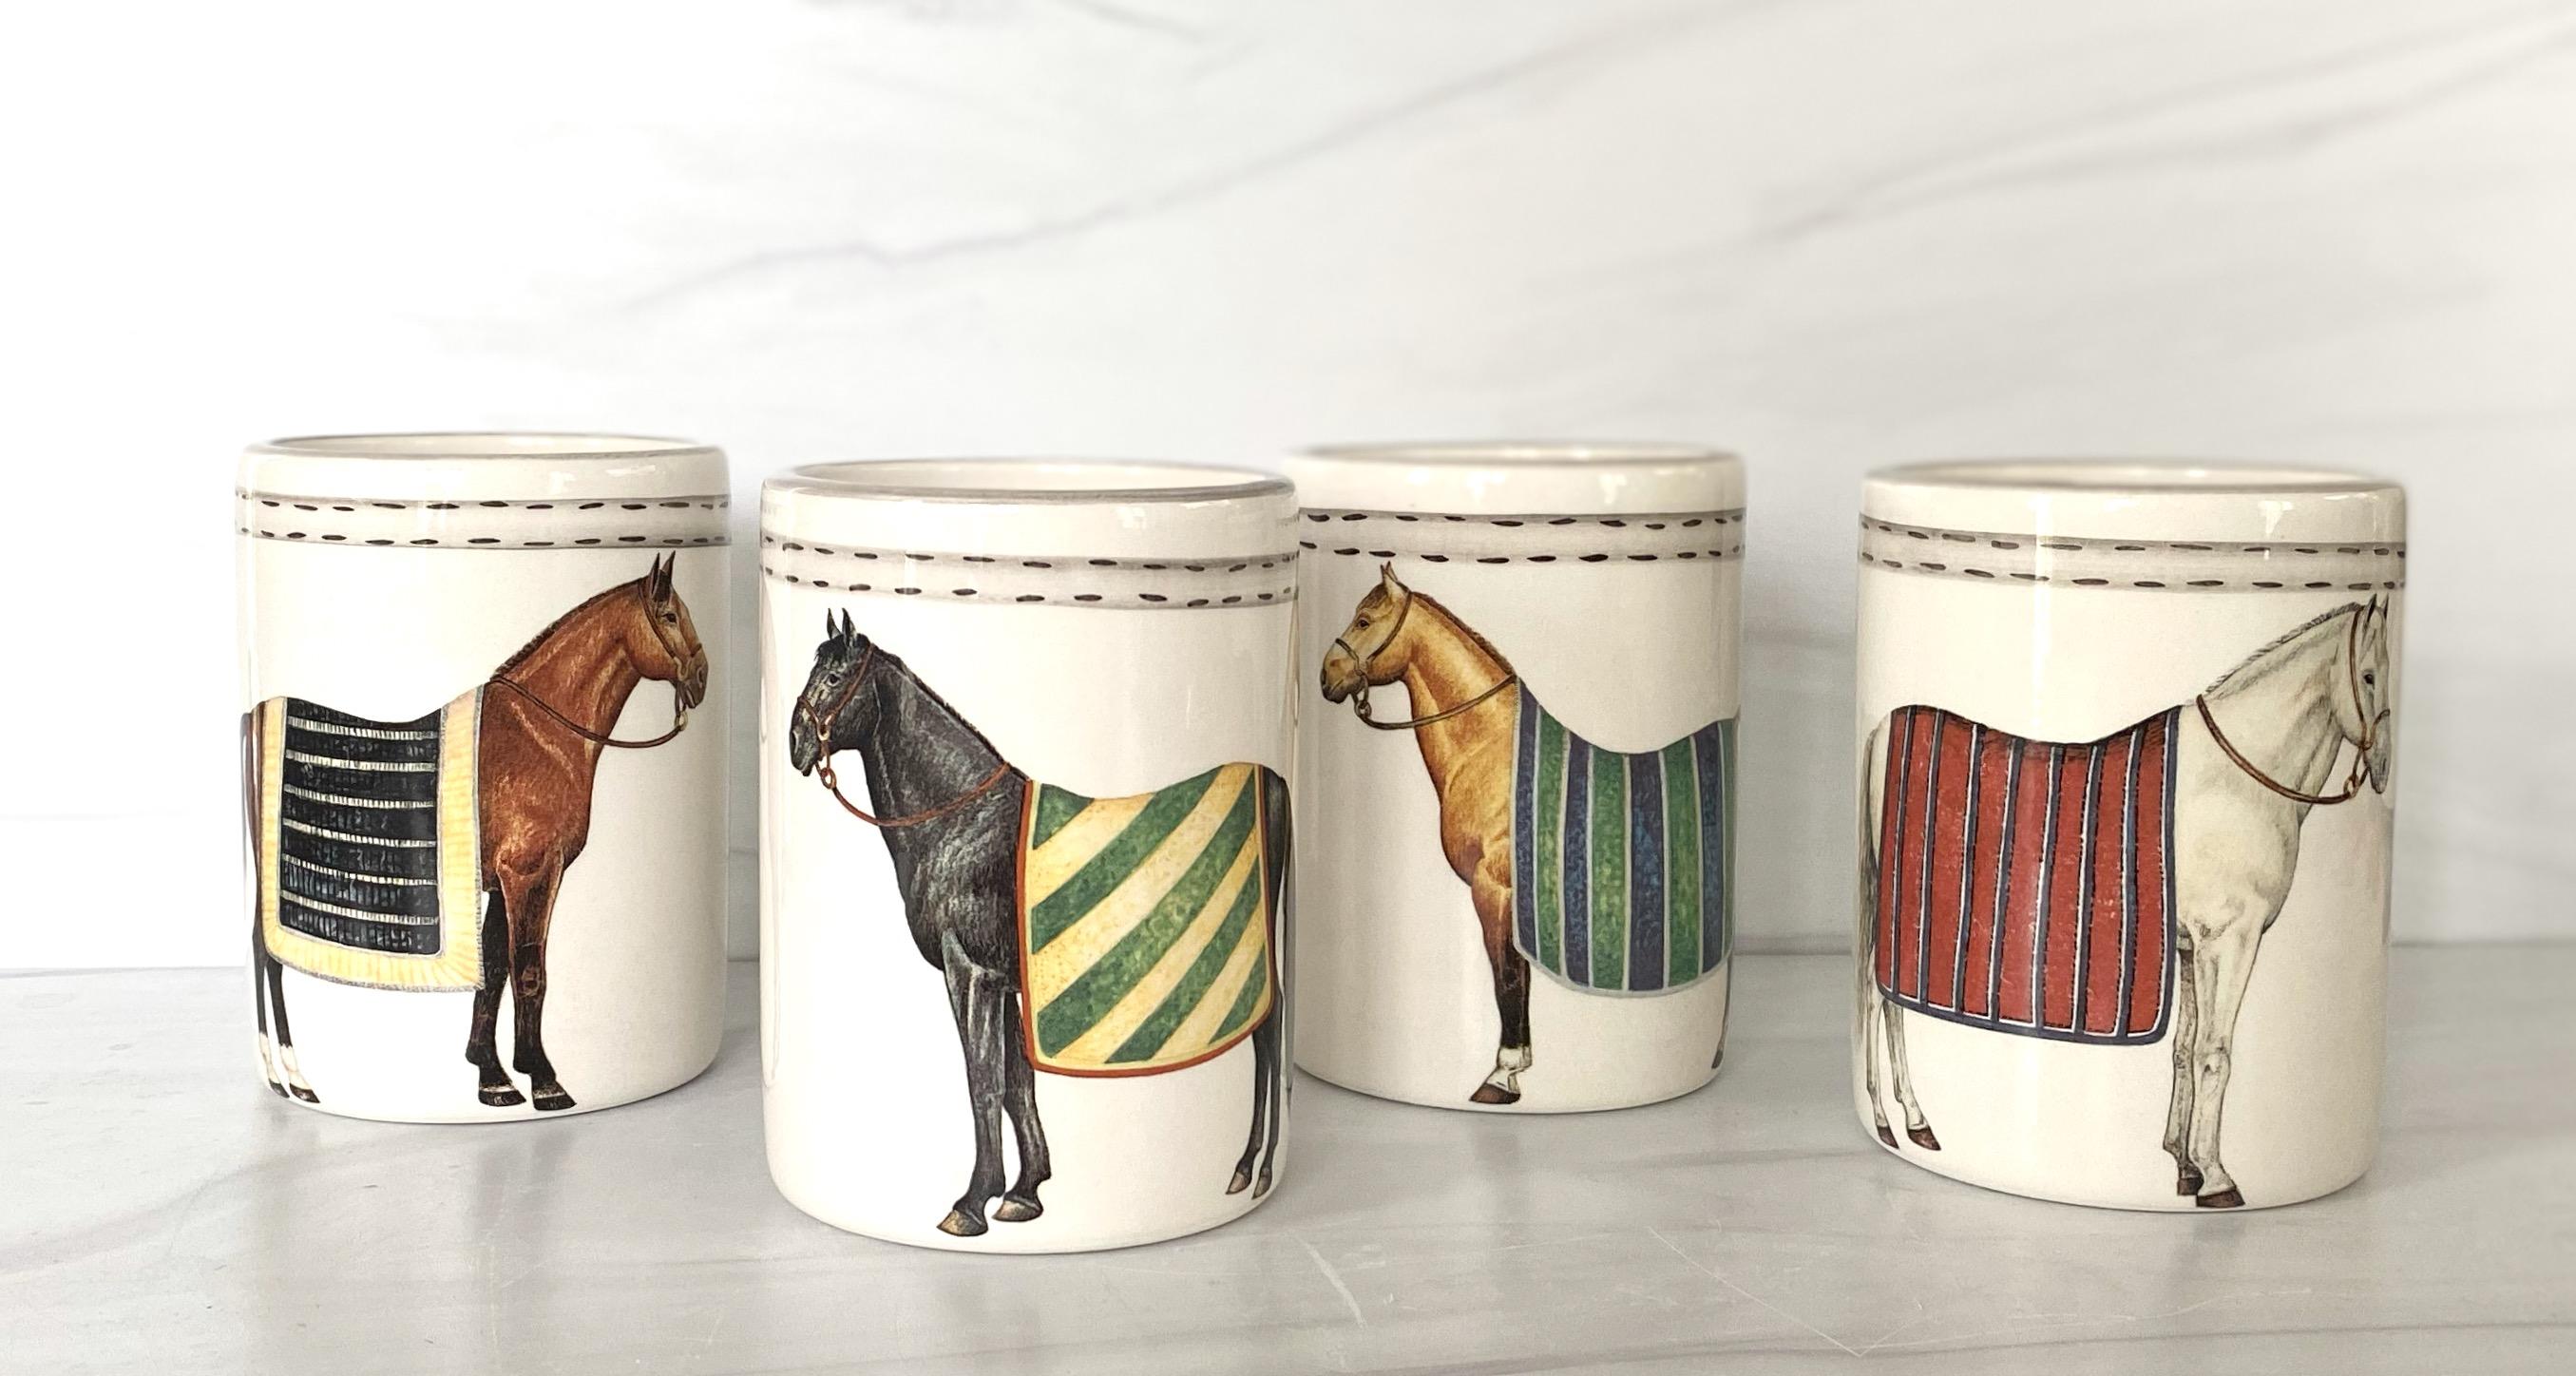 Devon Equestrian Ceramic Tumbler, Made in Italy for The Mane Lion
Sold in a set of 4 
Each tumbler features a different blanketed horse

The Mane Lion was born in 1979 in the heart of Philadelphia's fabled Main Line, offering a line of charming,